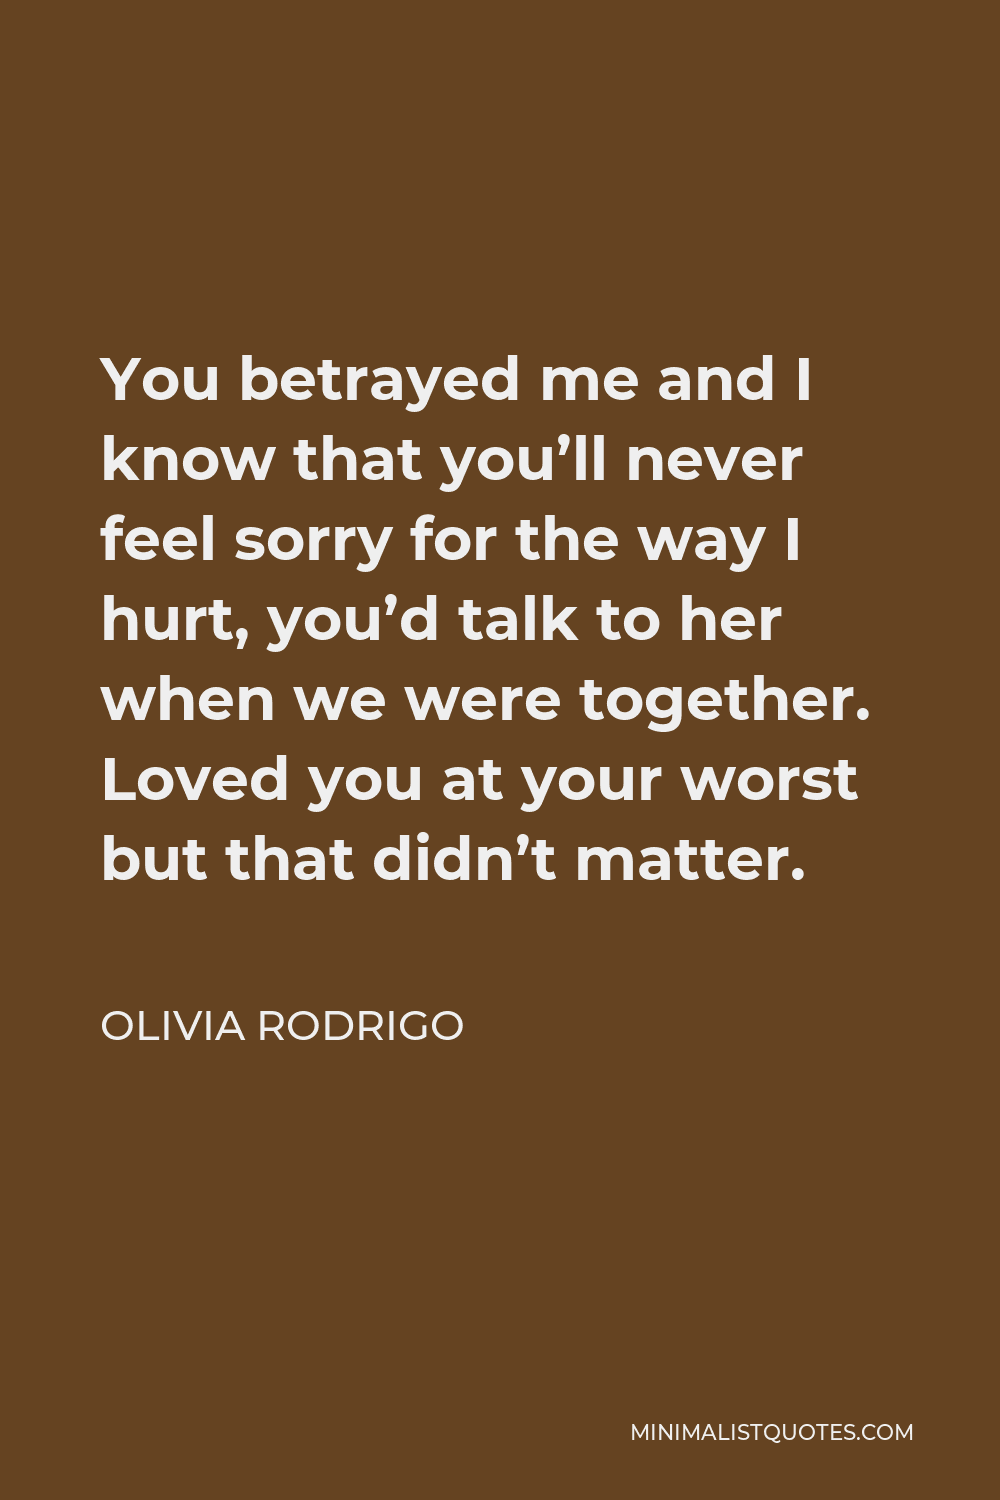 Olivia Rodrigo Quote - You betrayed me and I know that you’ll never feel sorry for the way I hurt, you’d talk to her when we were together. Loved you at your worst but that didn’t matter.